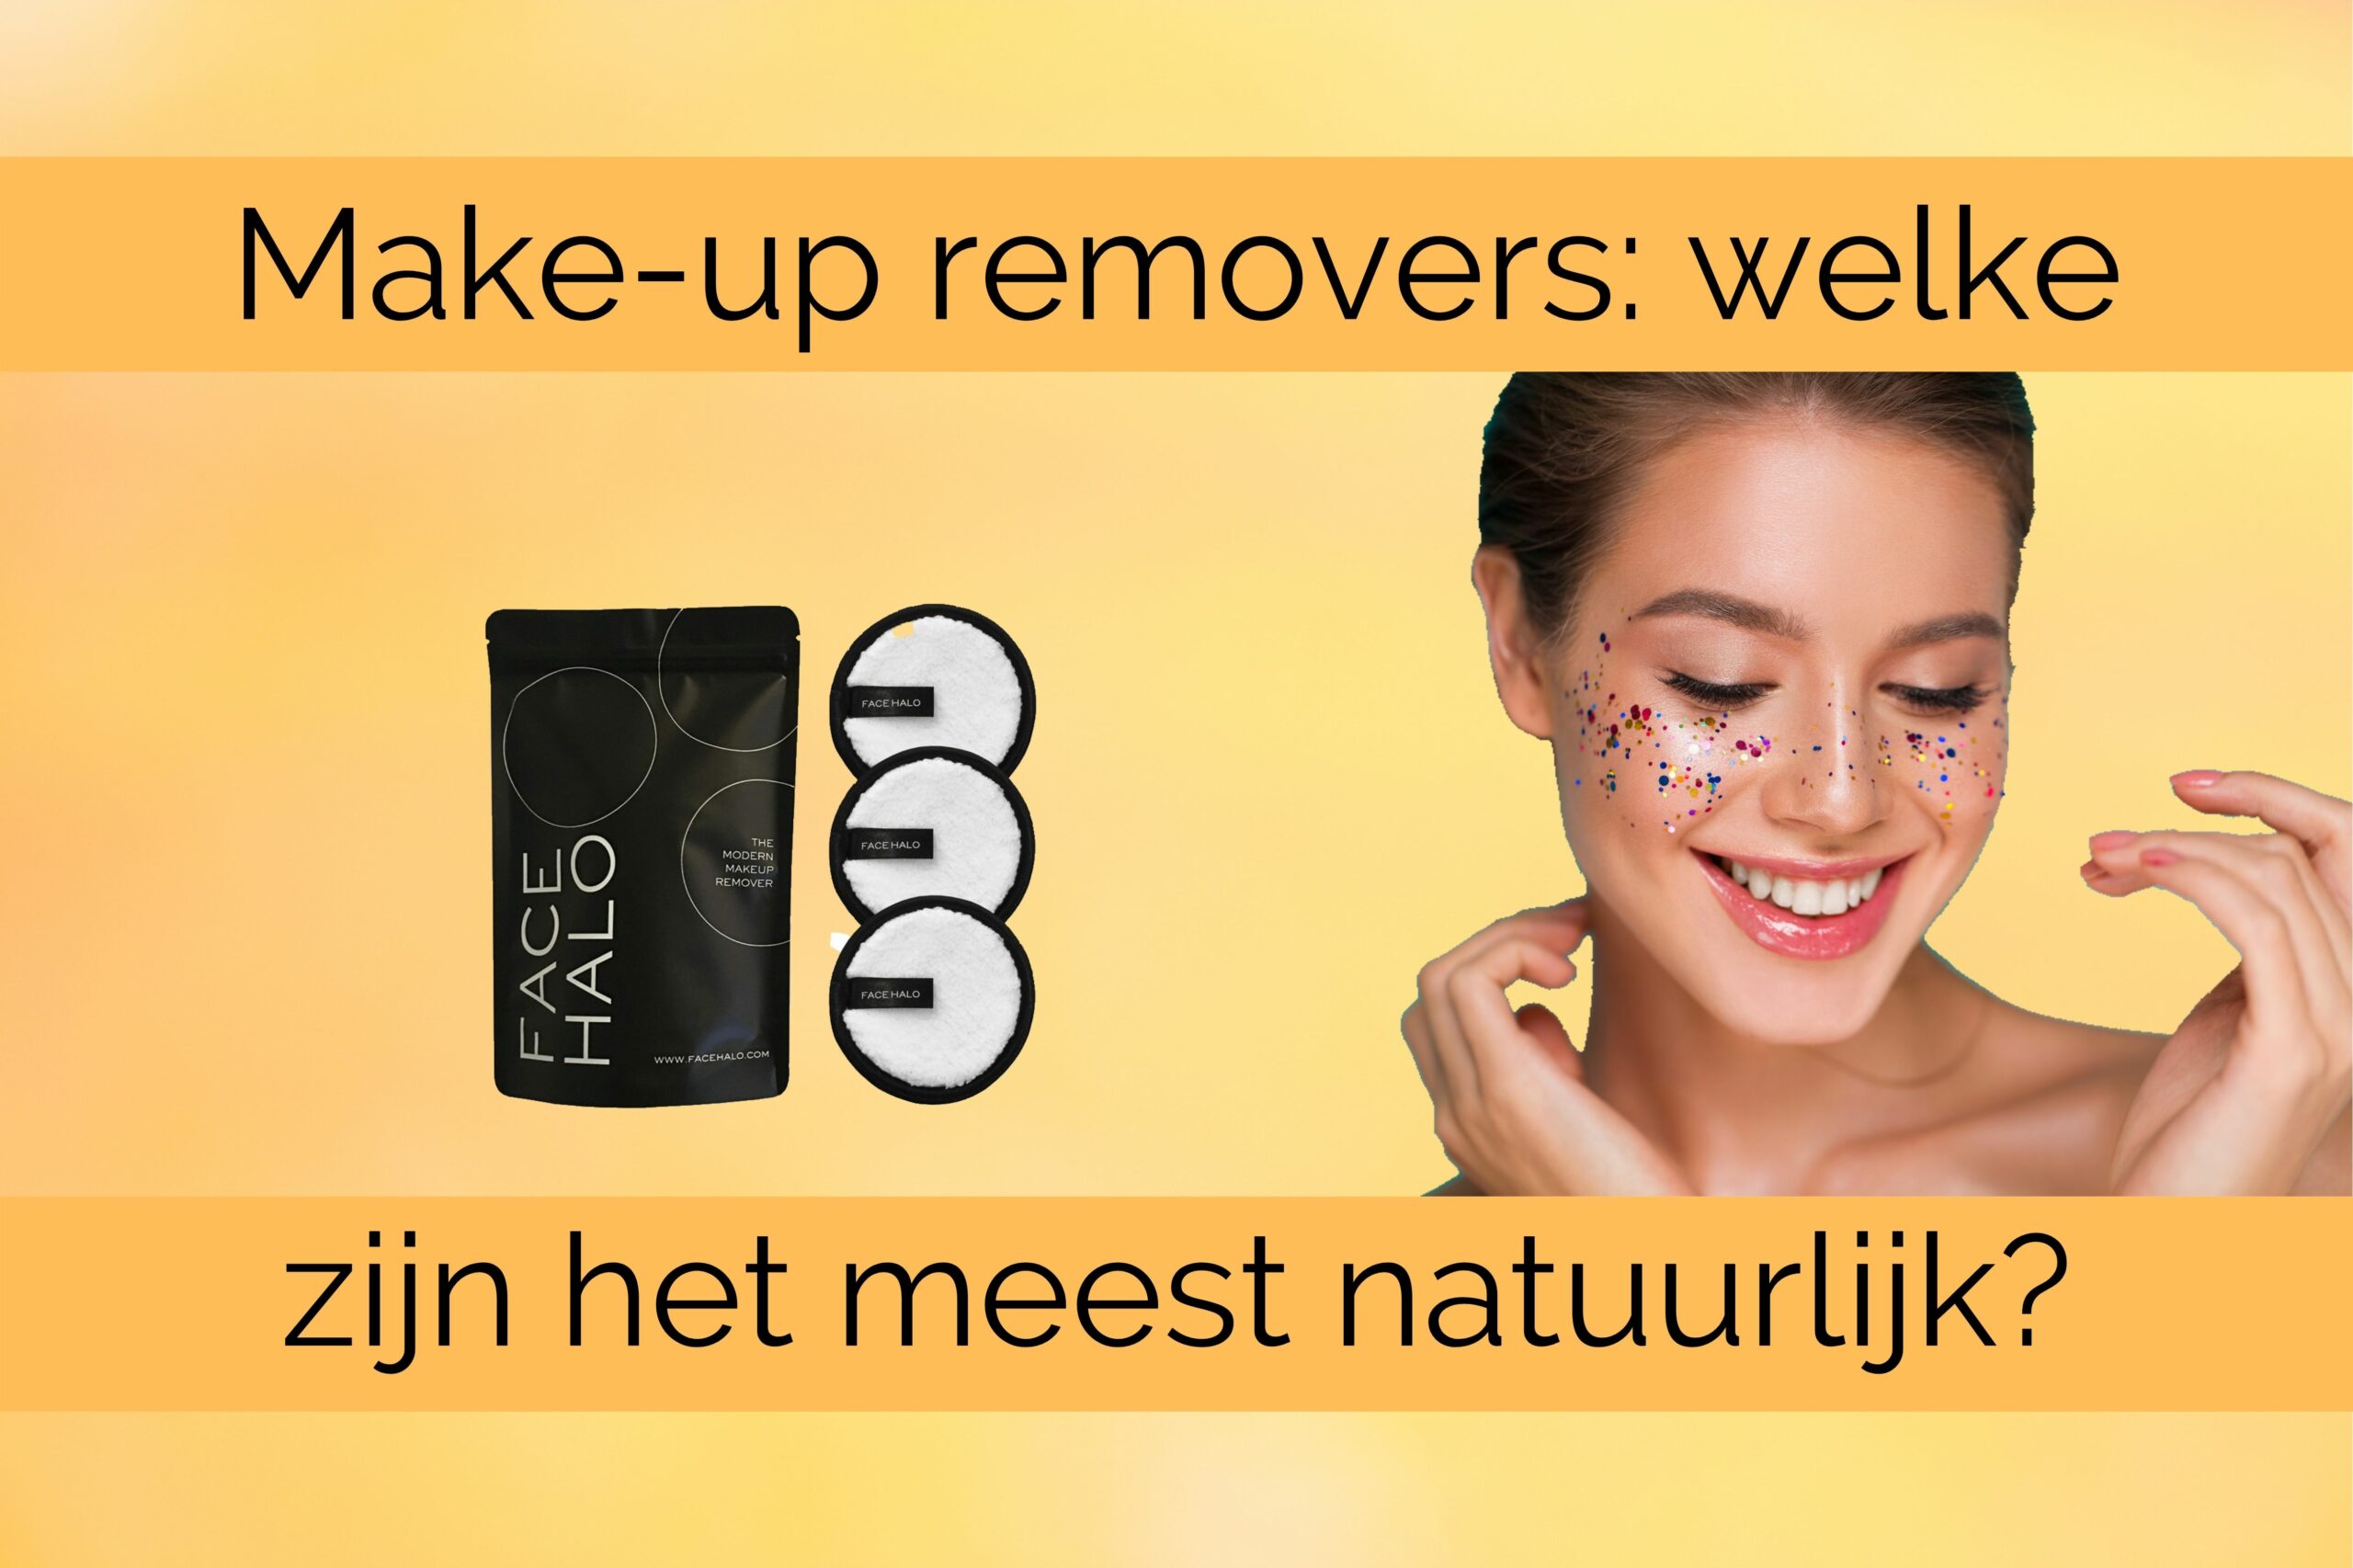 make-up removers